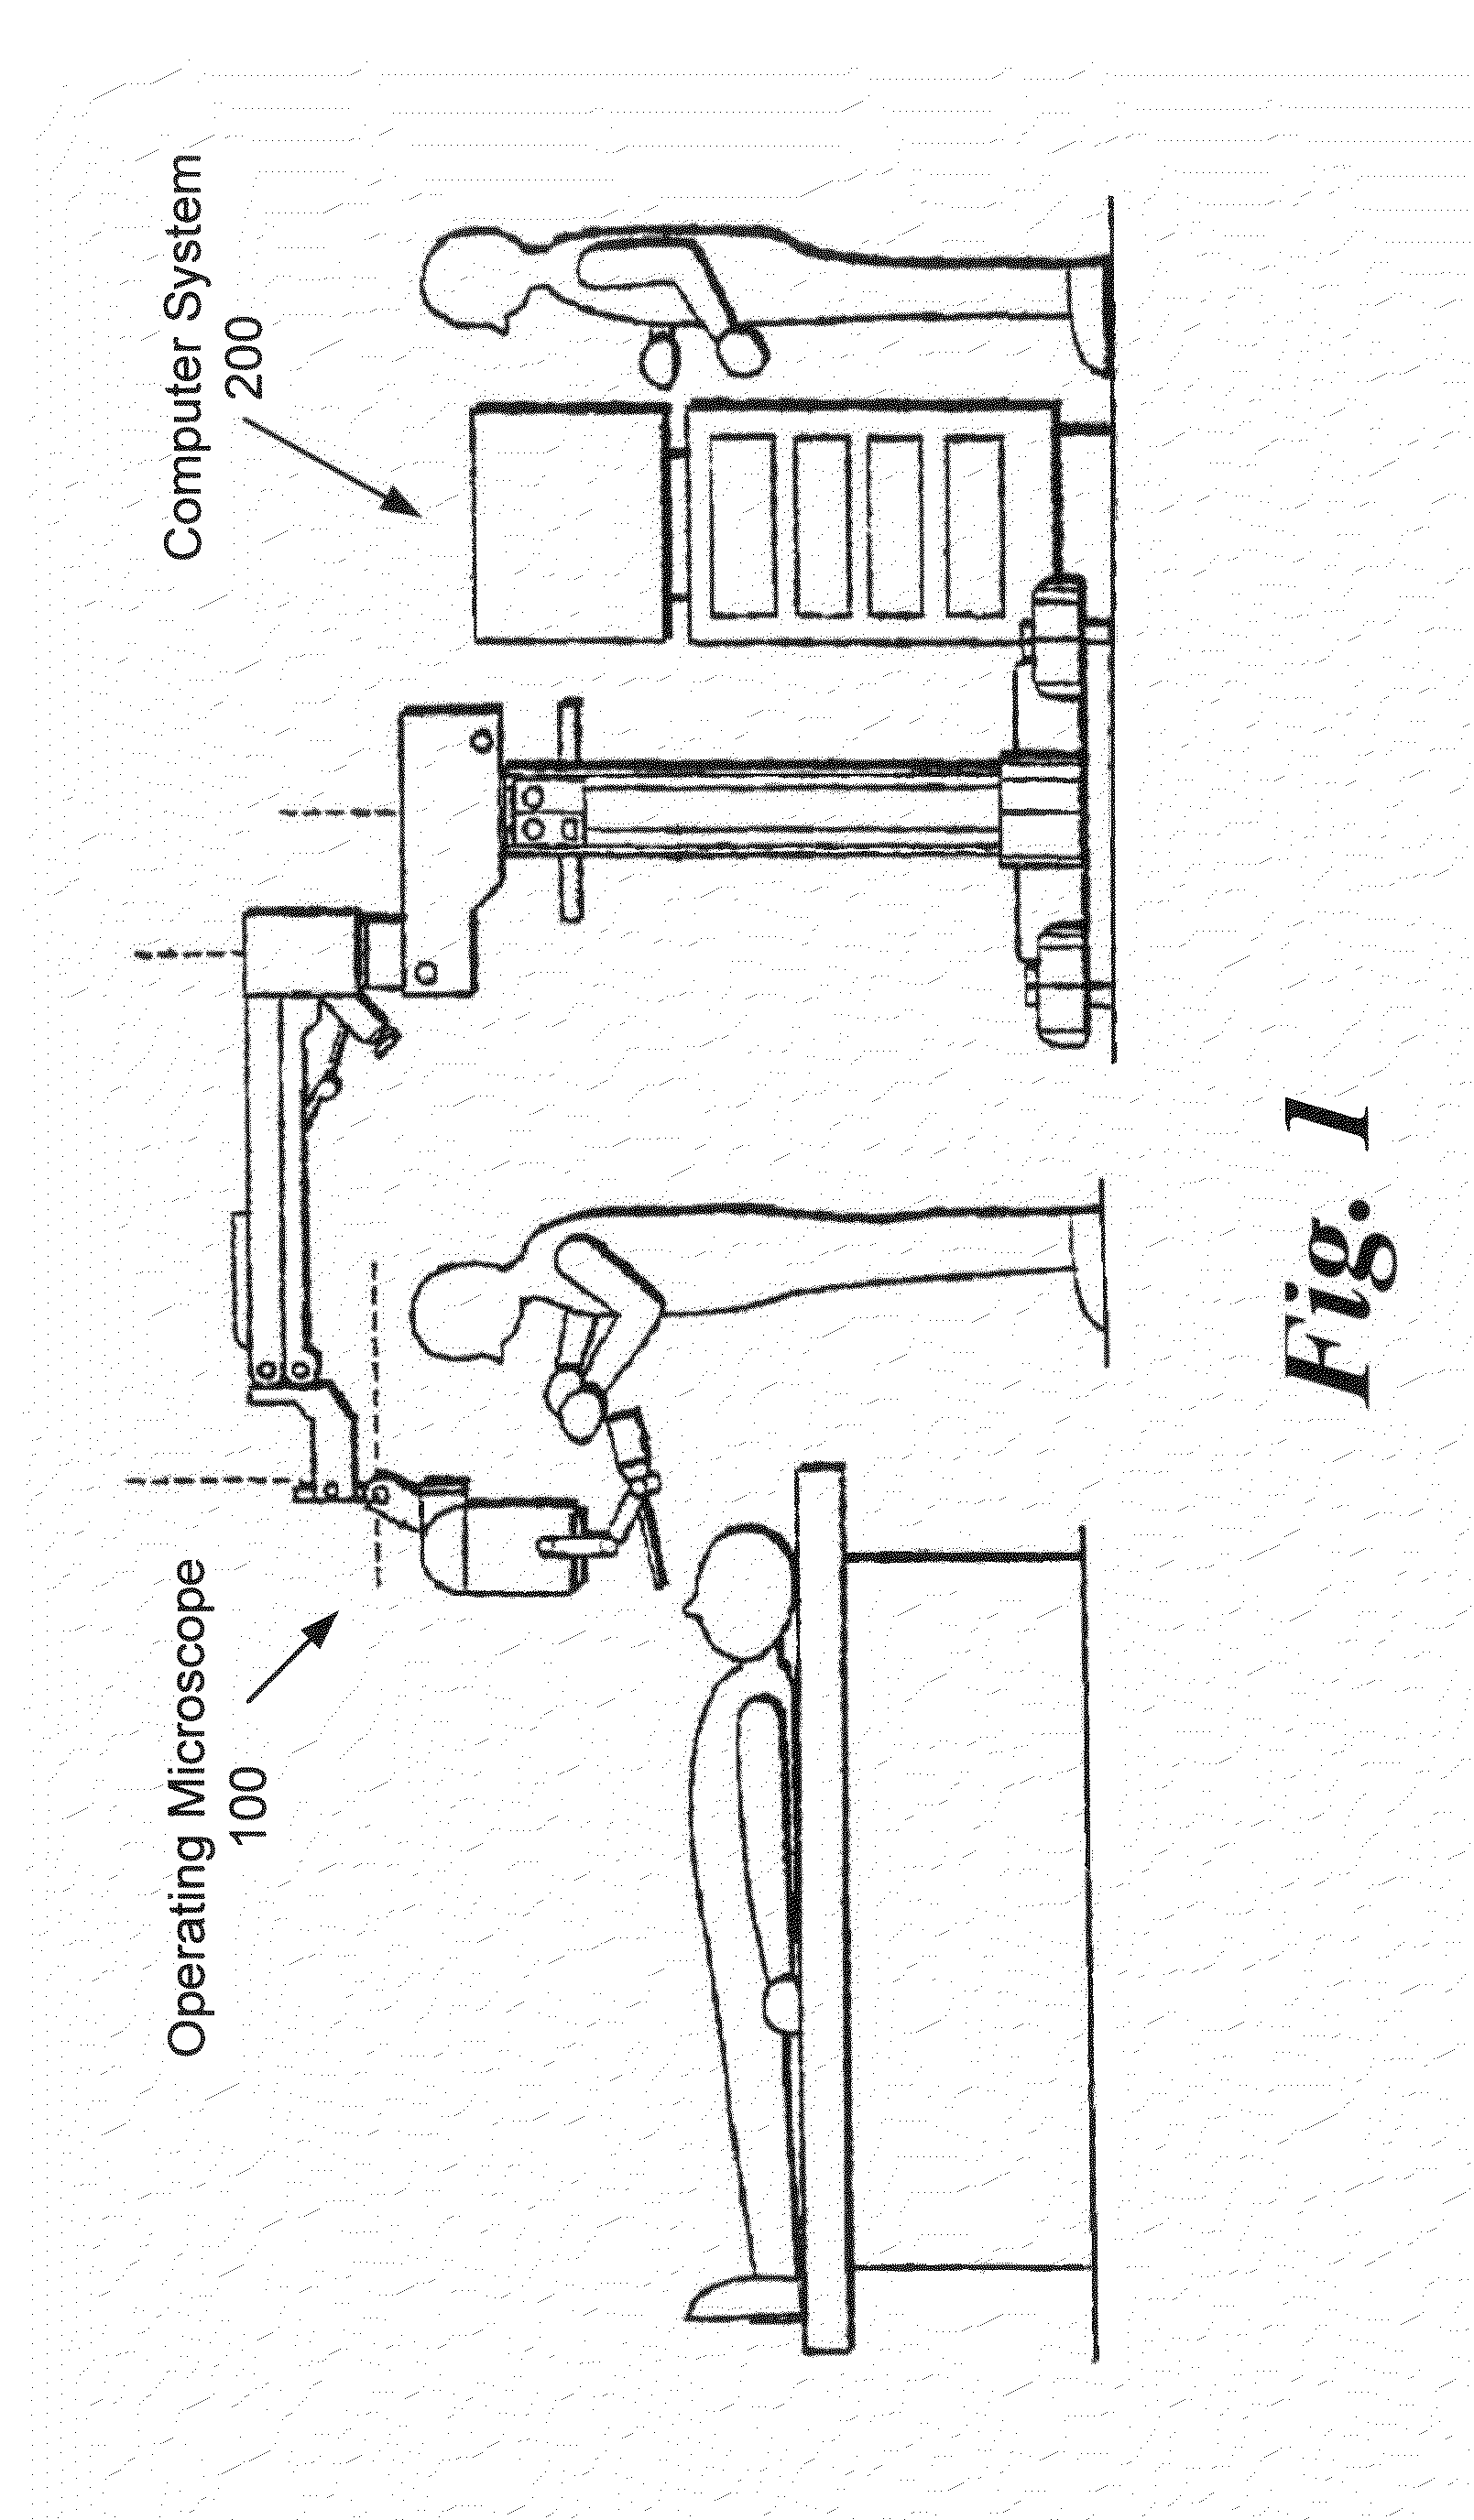 Method and instrument for surgical navigation